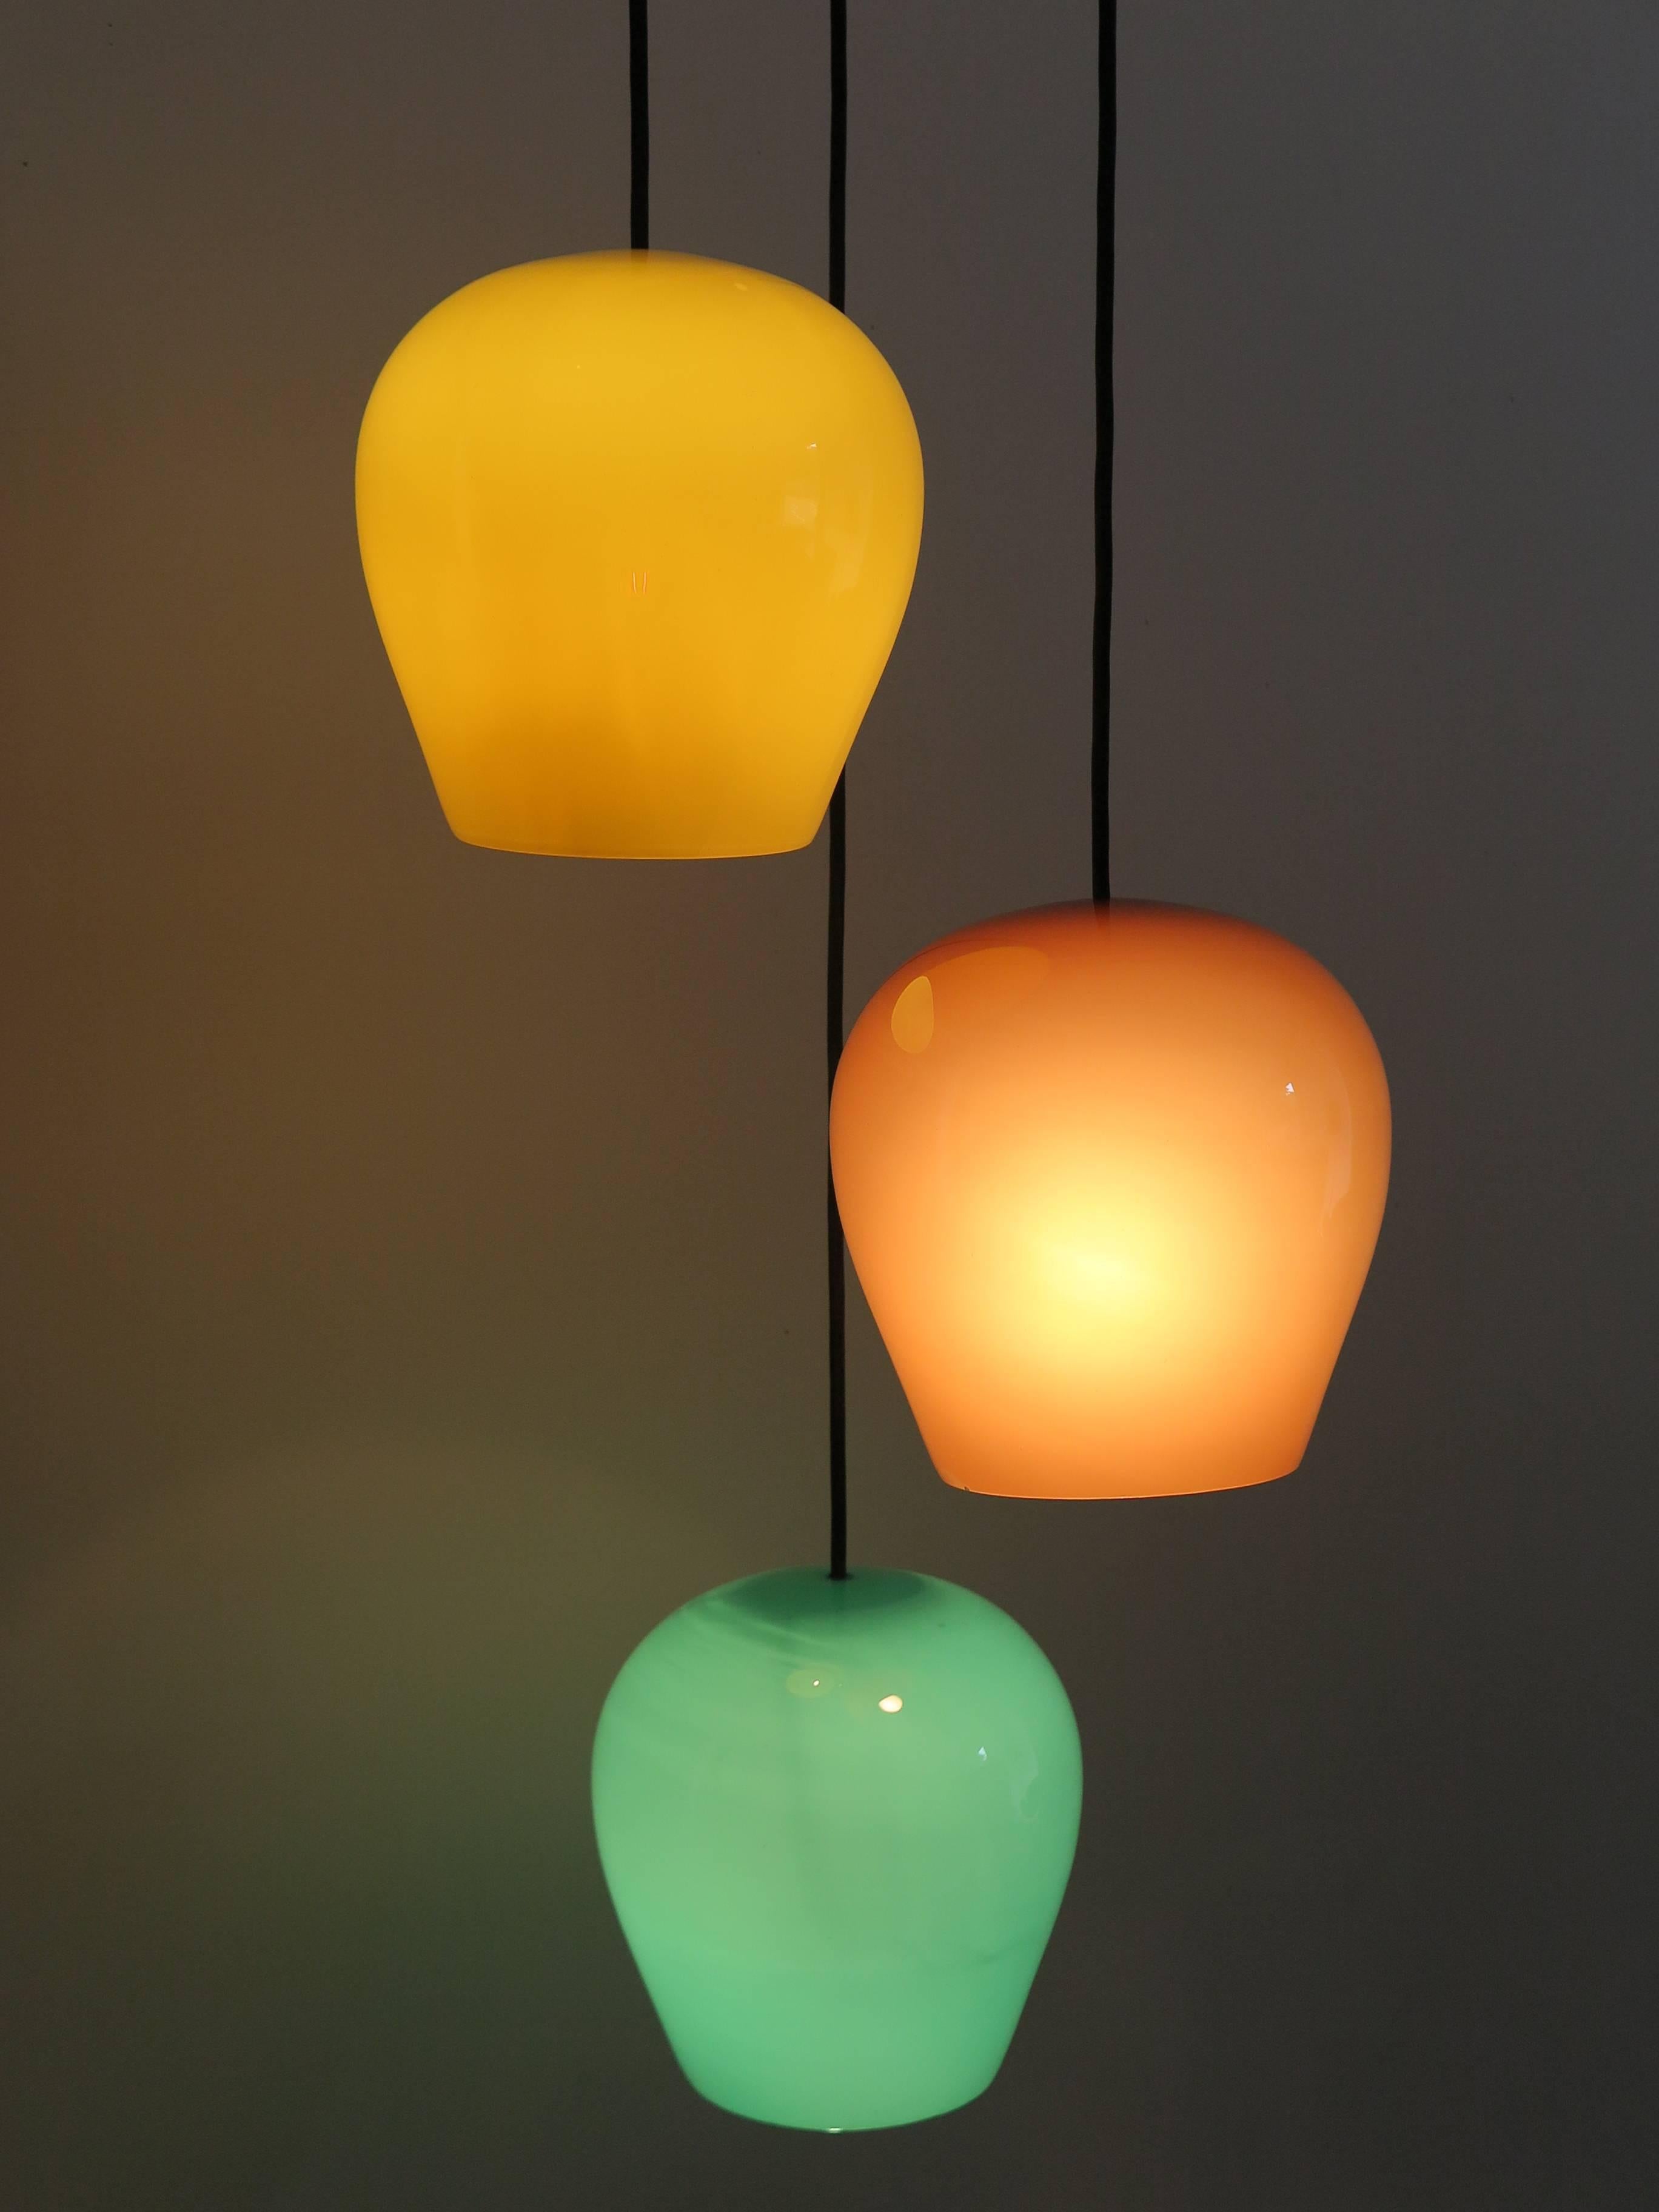 Italian Mid-Century Modern pendant lamp designed by Massimo Vignelli for Venini Murano with colored glass and polished brass, circa 1955. All original, electrical parts, all vintage, working.
Measure: Diffuser colored glass diameter 24 cm.
 